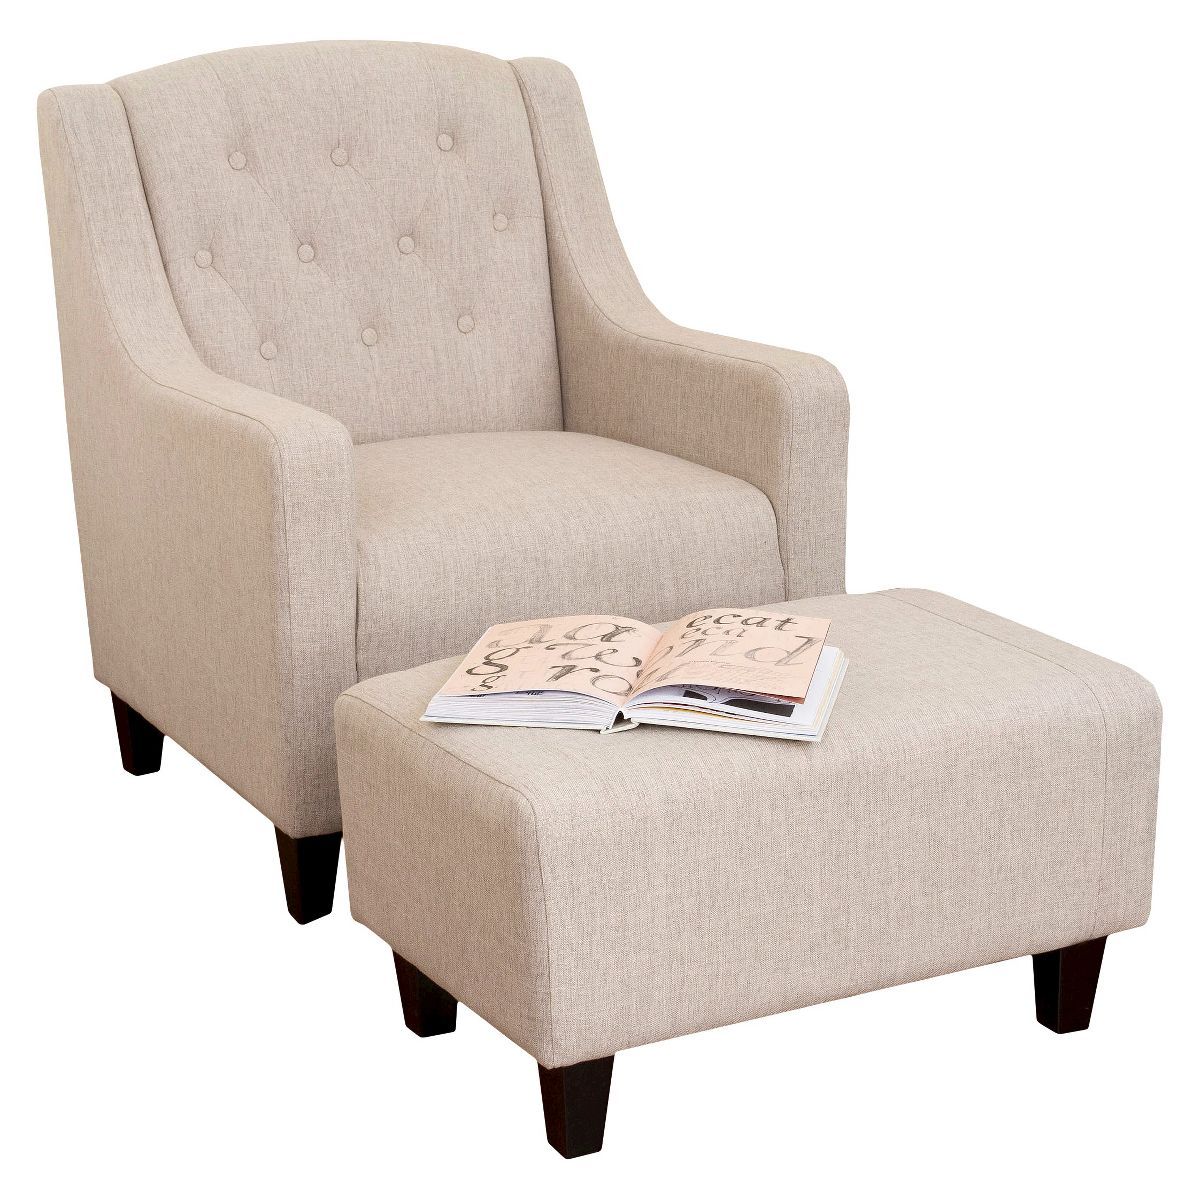 Elaine Tufted Fabric Chair and Ottoman - Christopher Knight Home | Target